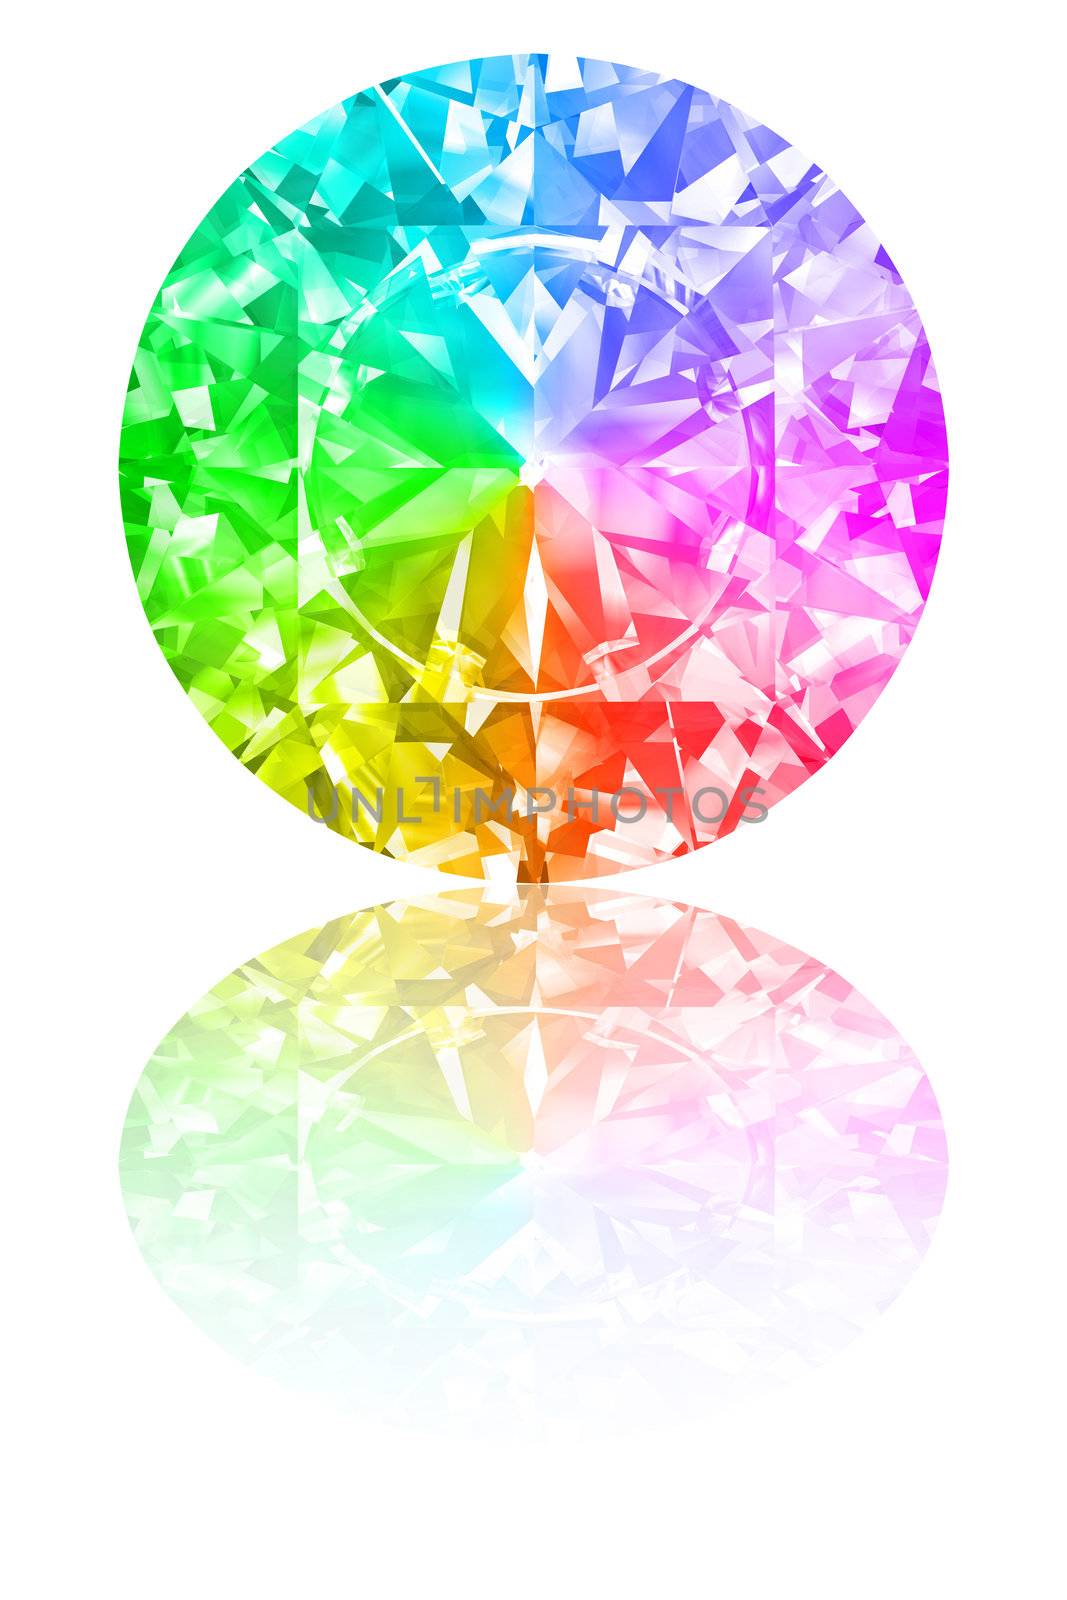 Diamond of rainbow colours on glossy white background. High resolution 3D render with reflections